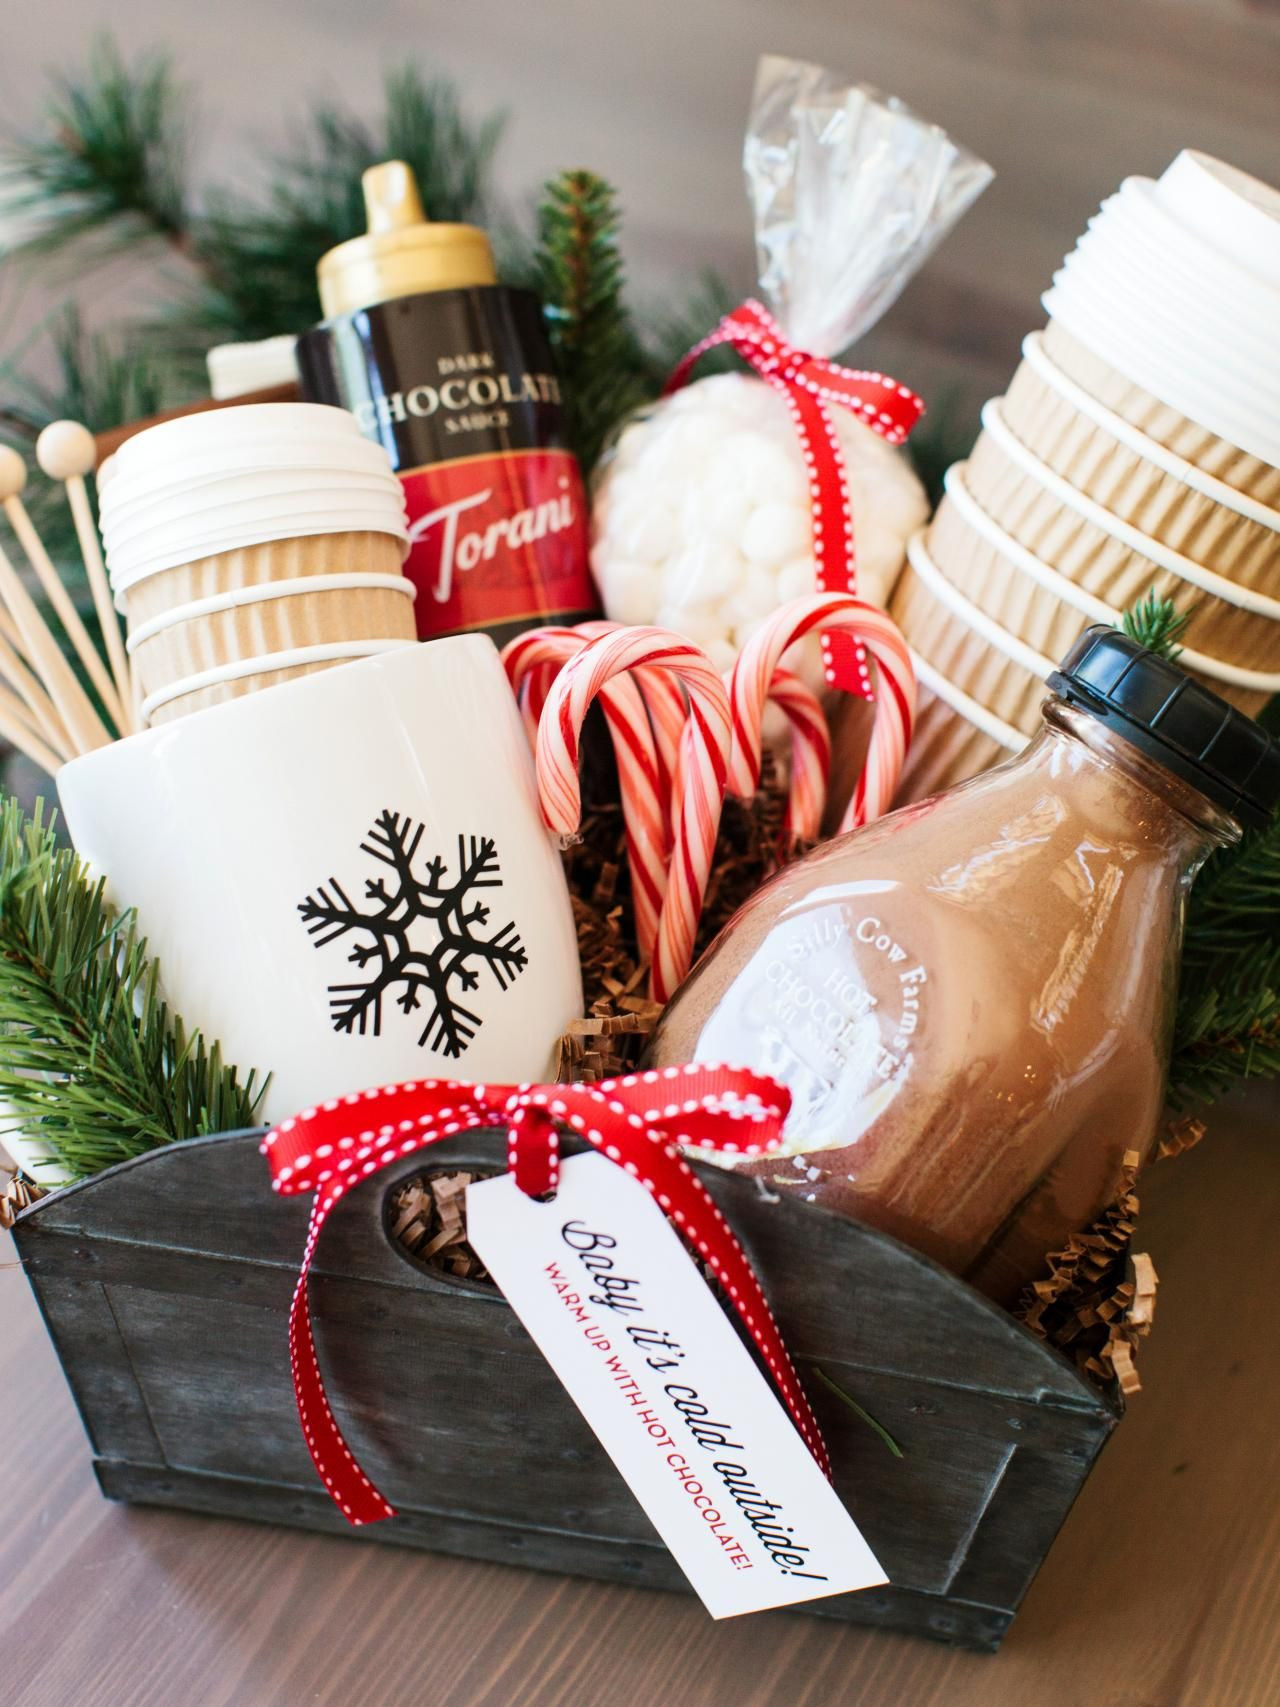 Holiday Cooking Gift Ideas
 Culinary Gift Basket Ideas